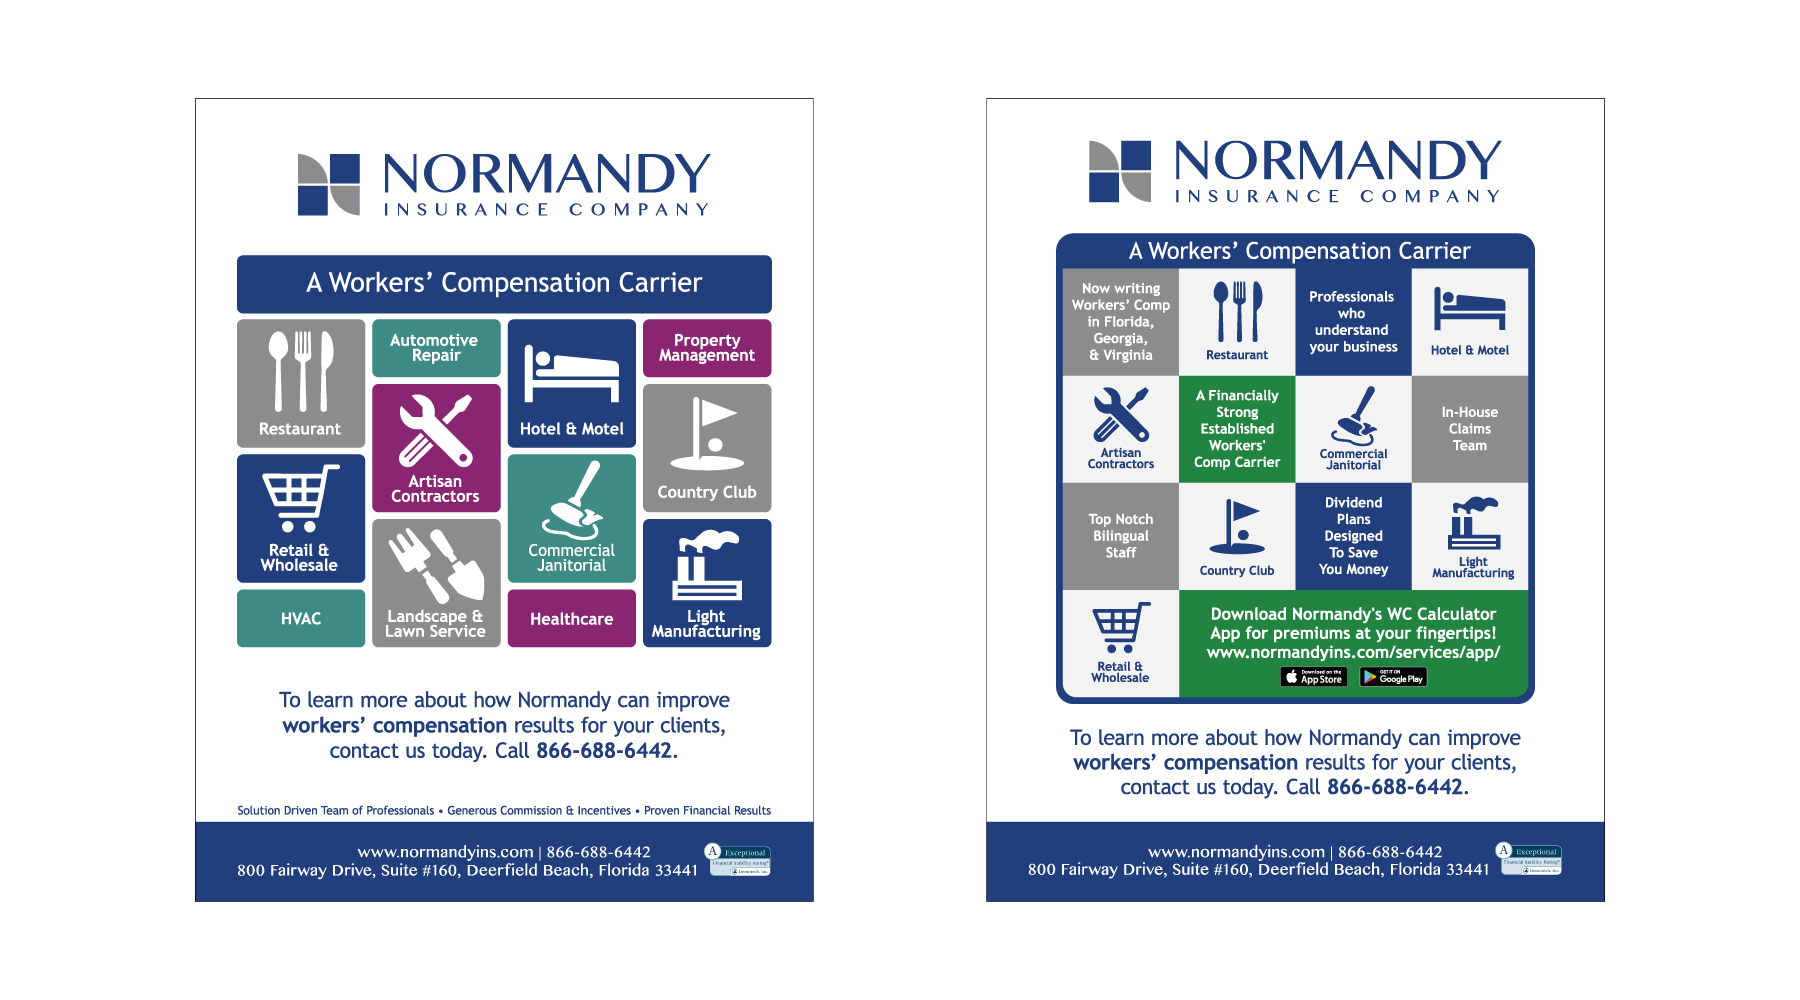 Normandy covention ad